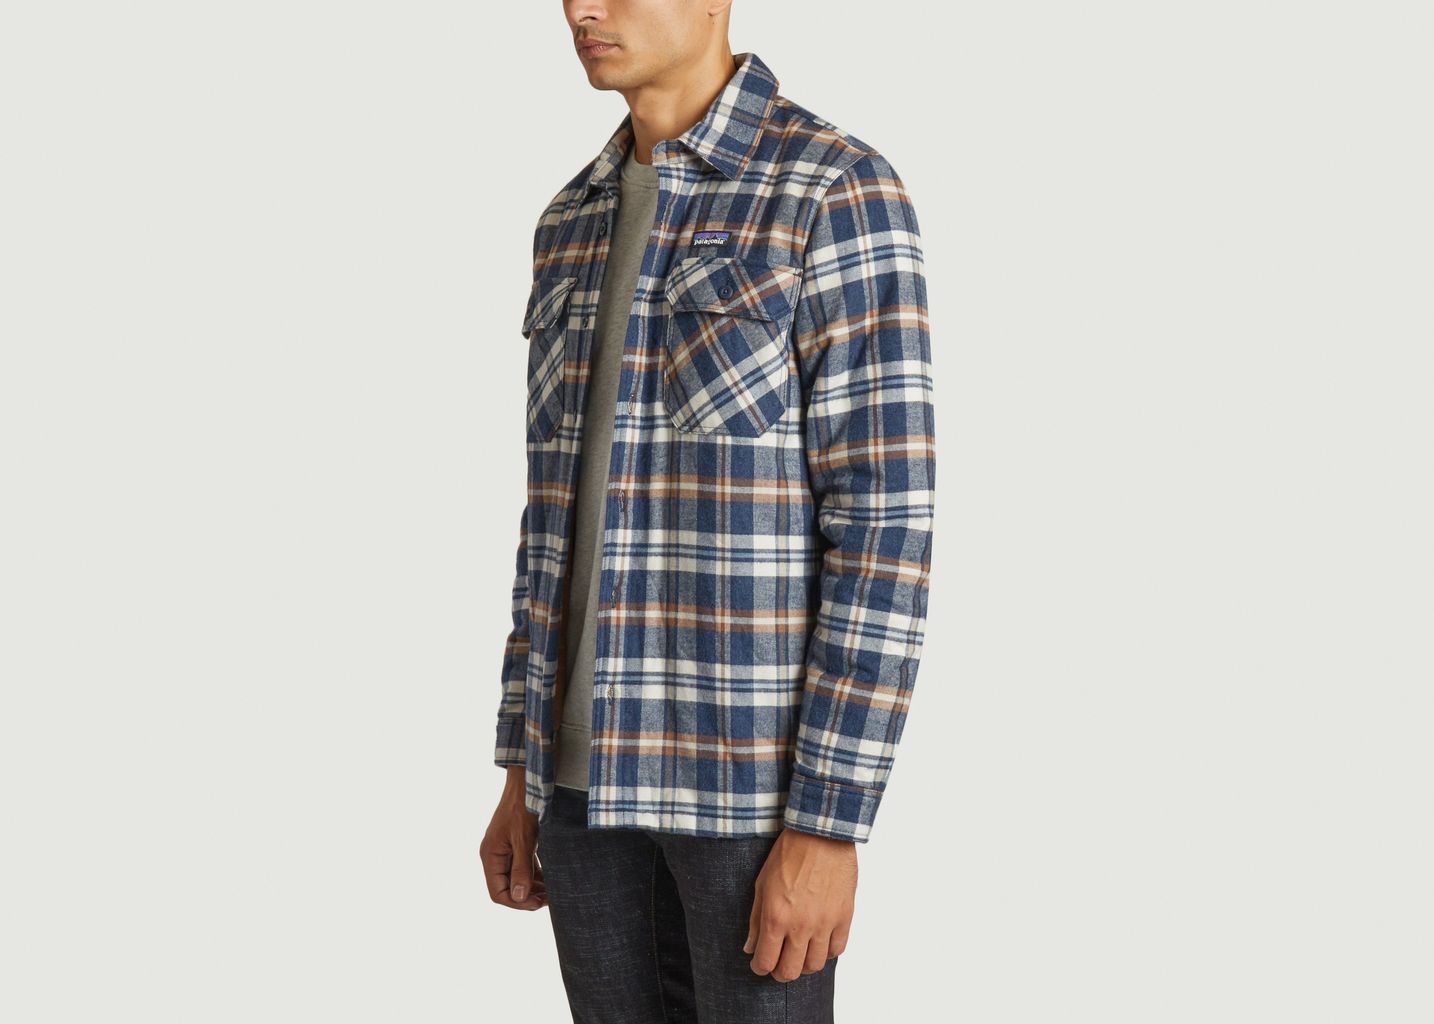 Veste surchemise M's Insulated Organic Cotton MW Fjord Flannel Shirt - Patagonia